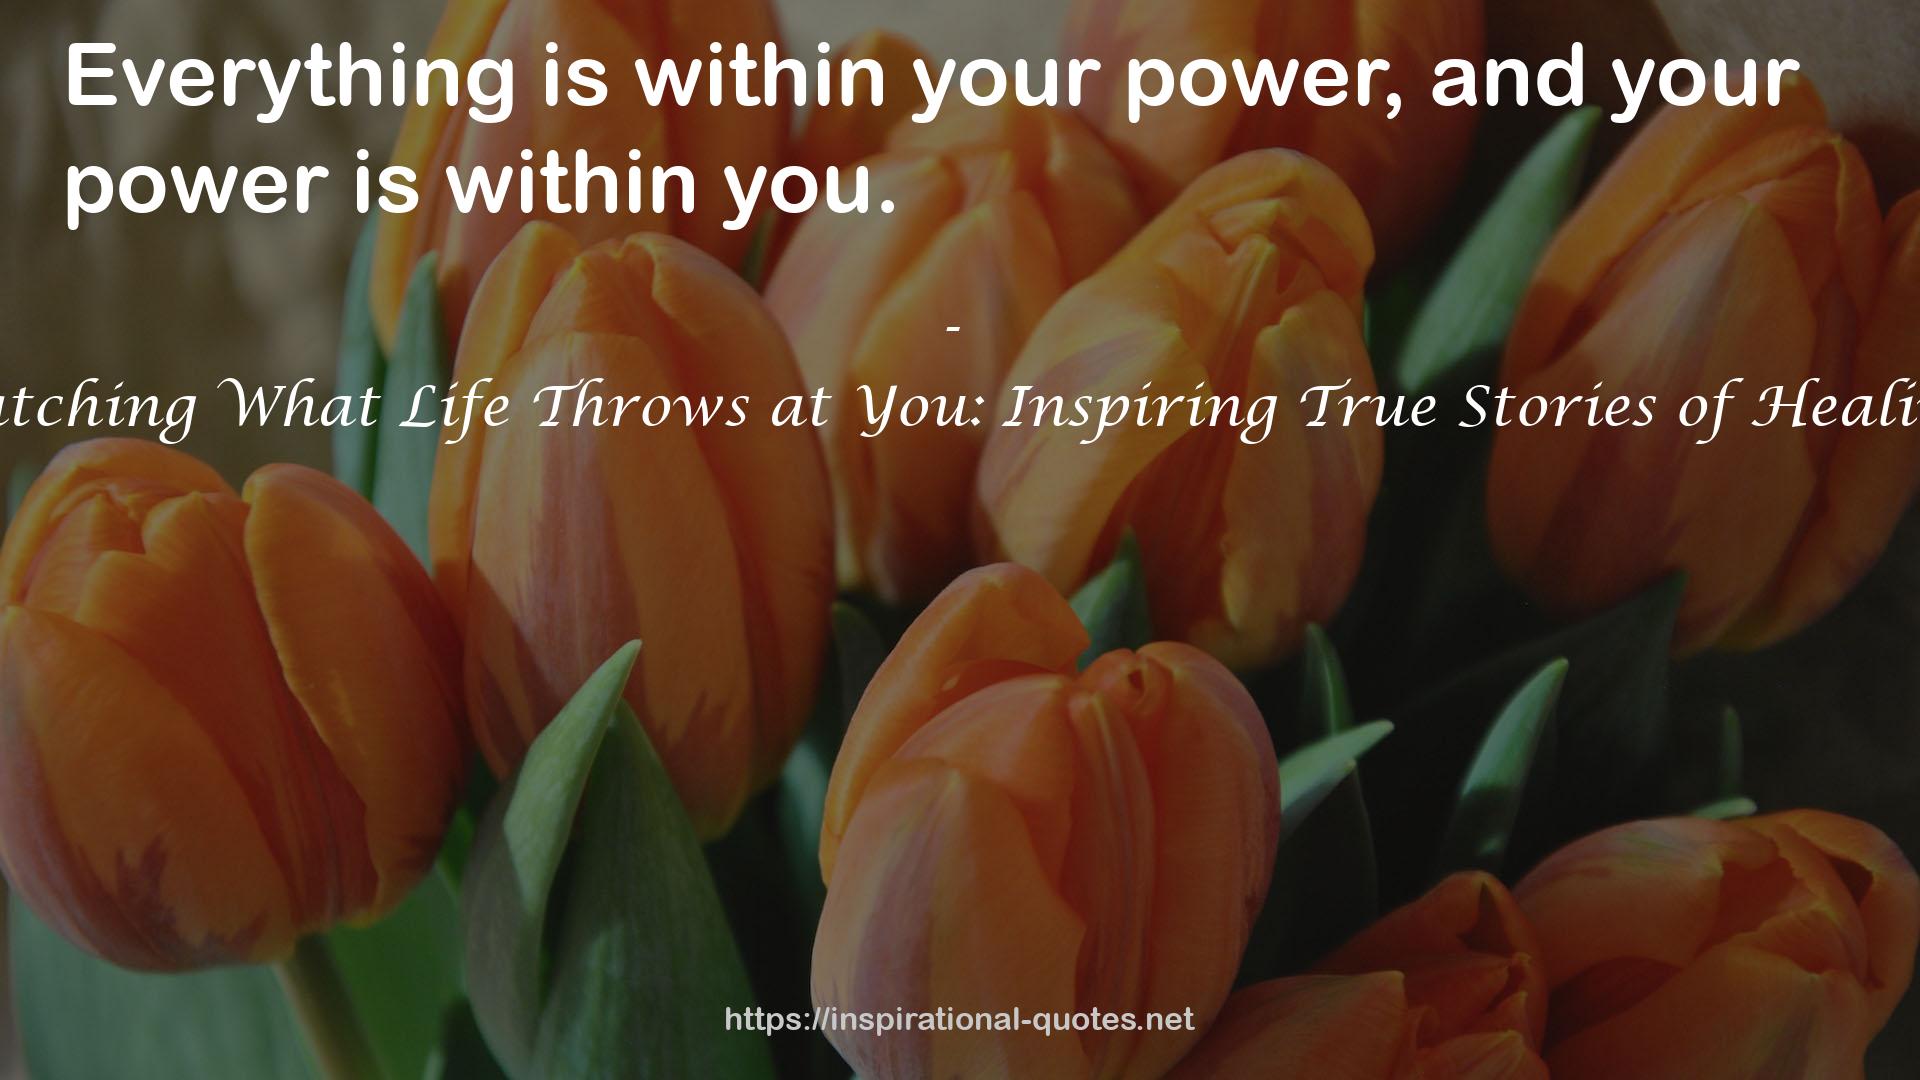 Catching What Life Throws at You: Inspiring True Stories of Healing QUOTES